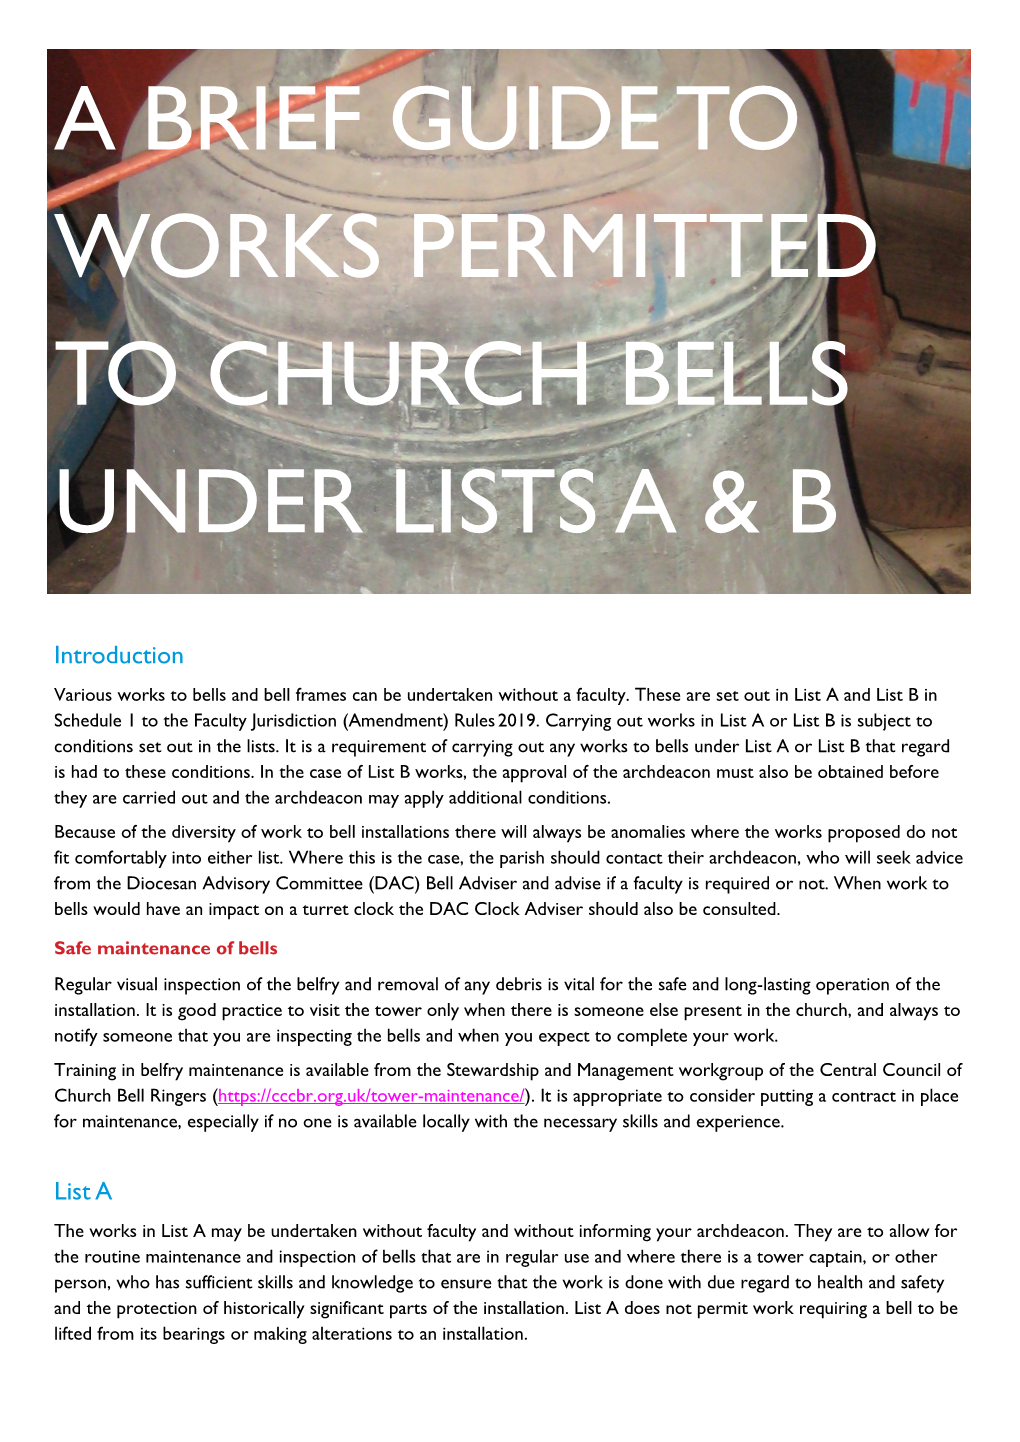 A Brief Guide to Work Permitted to Church Bells